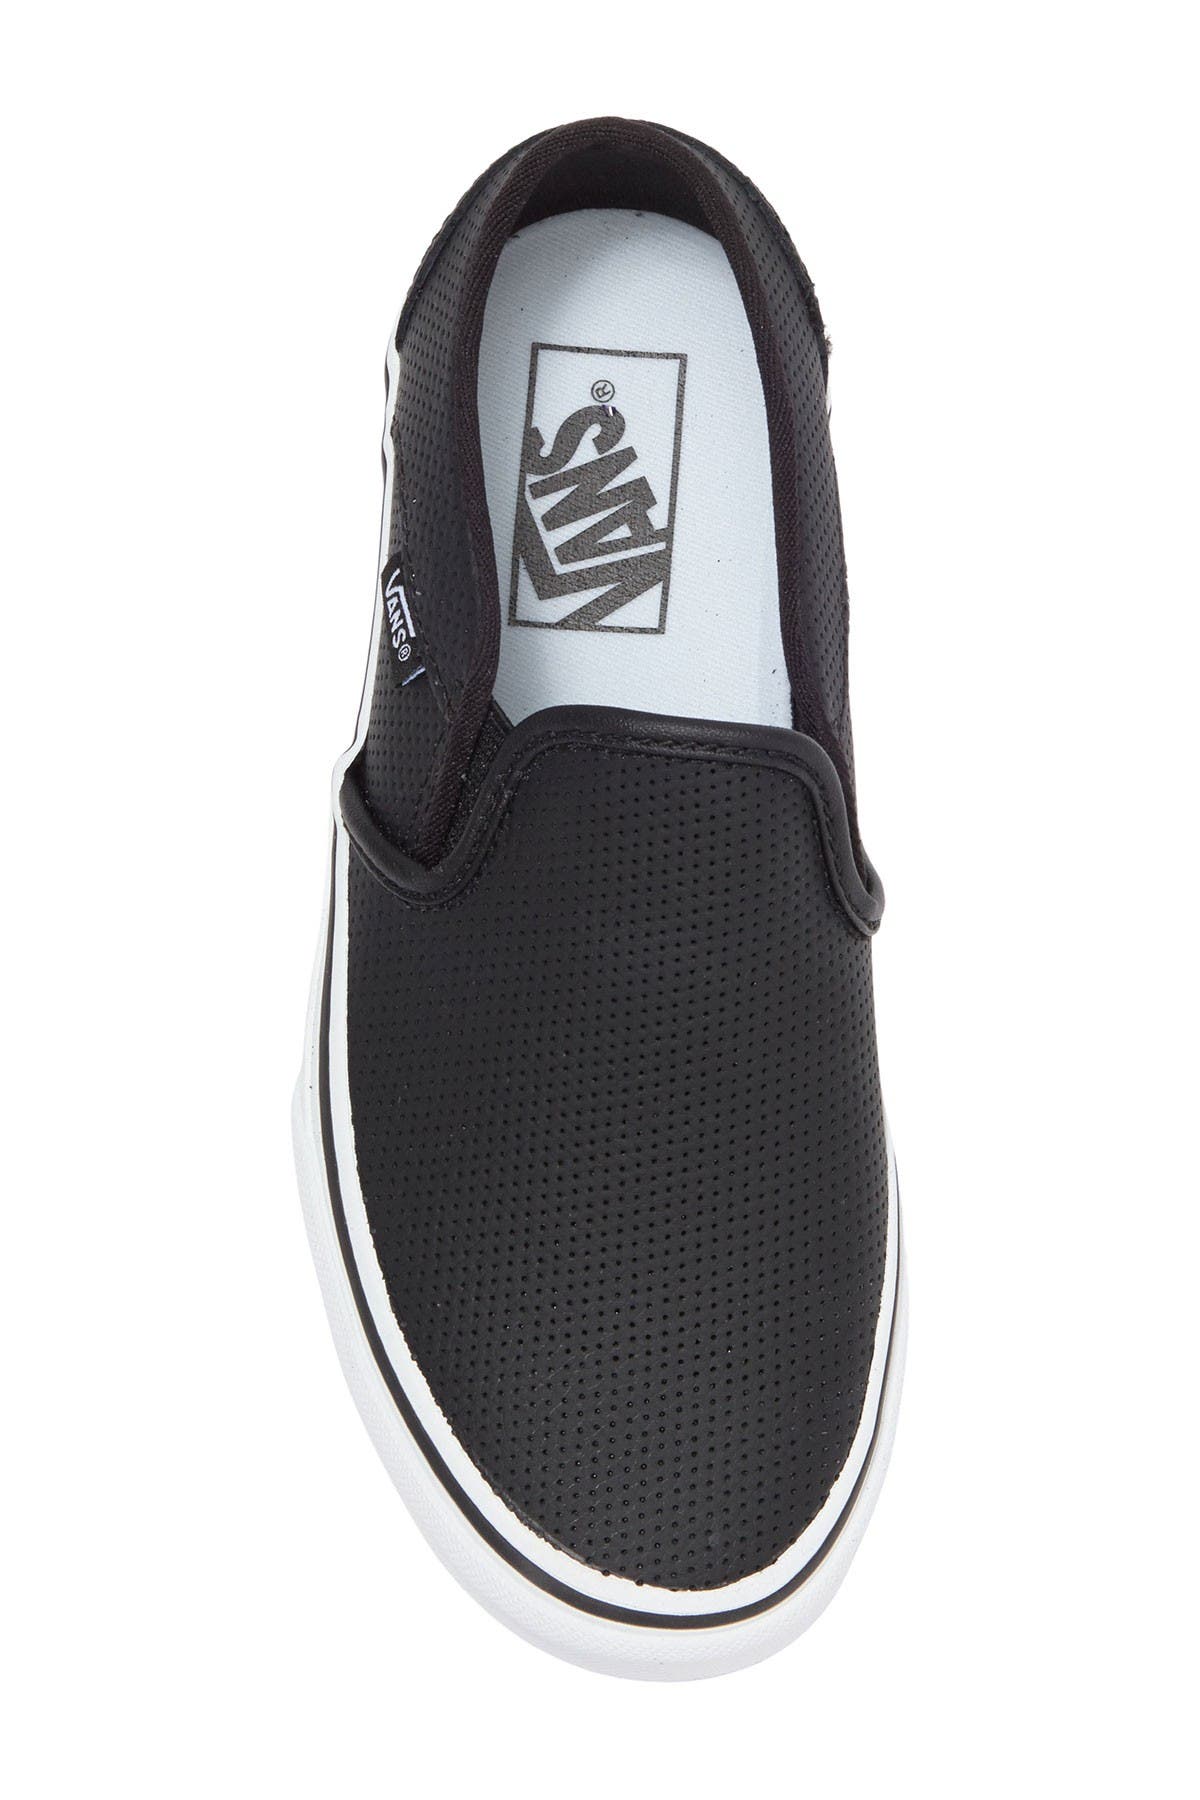 vans asher perforated slip on